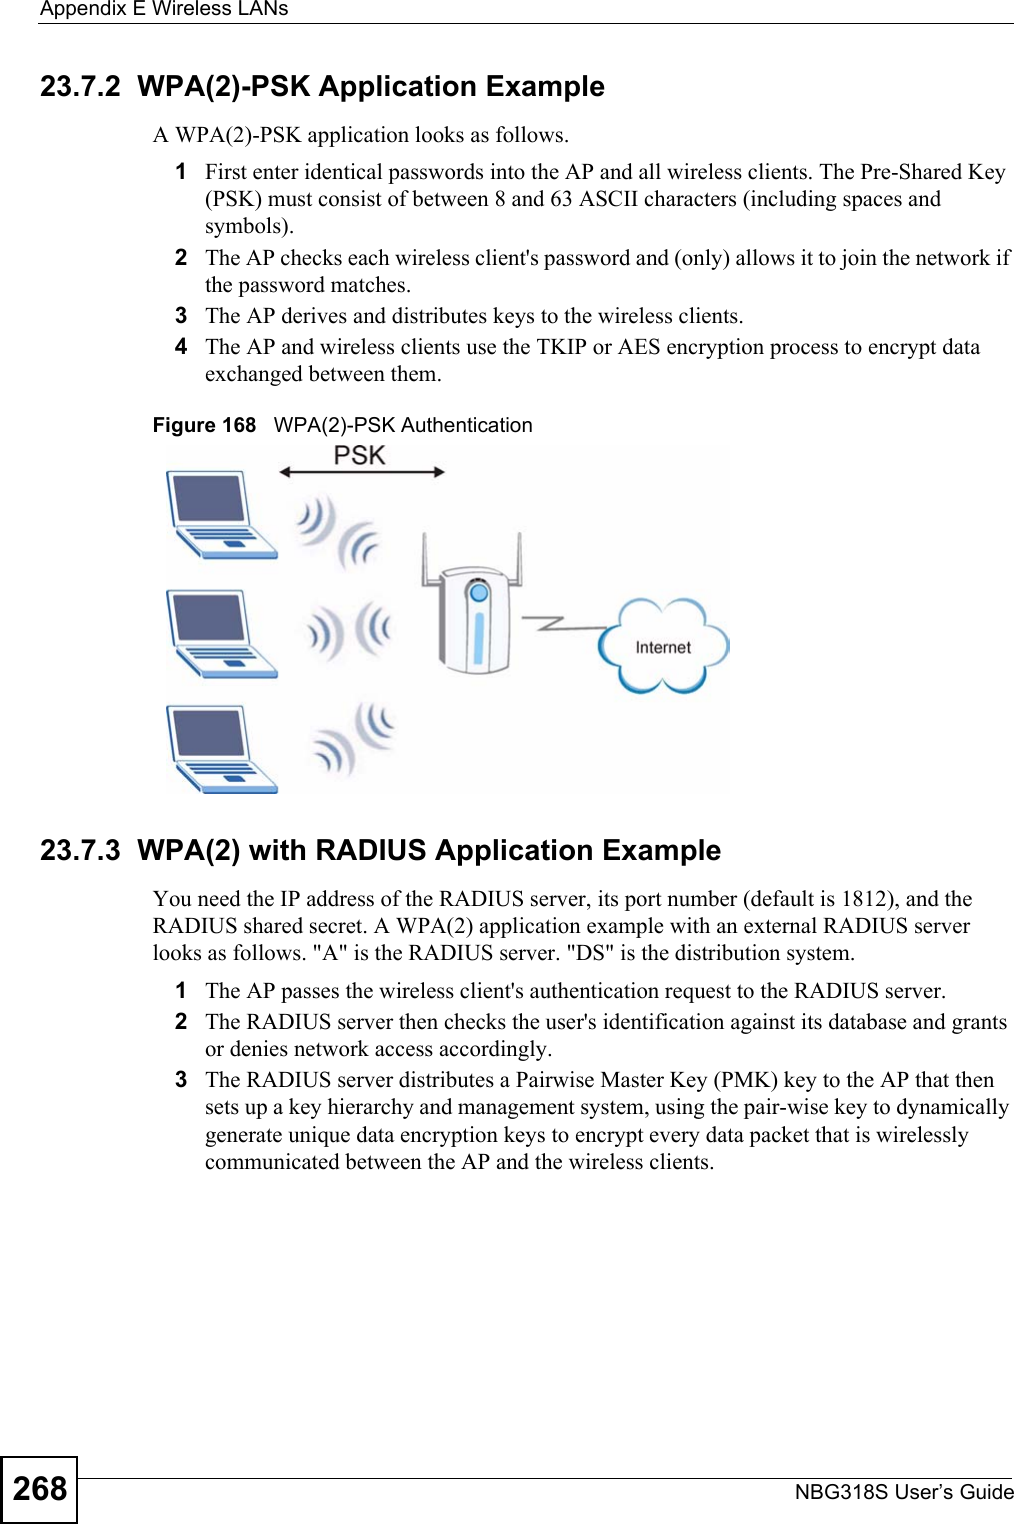 Appendix E Wireless LANsNBG318S User’s Guide26823.7.2  WPA(2)-PSK Application ExampleA WPA(2)-PSK application looks as follows.1First enter identical passwords into the AP and all wireless clients. The Pre-Shared Key (PSK) must consist of between 8 and 63 ASCII characters (including spaces and symbols).2The AP checks each wireless client&apos;s password and (only) allows it to join the network if the password matches.3The AP derives and distributes keys to the wireless clients.4The AP and wireless clients use the TKIP or AES encryption process to encrypt data exchanged between them.Figure 168   WPA(2)-PSK Authentication23.7.3  WPA(2) with RADIUS Application ExampleYou need the IP address of the RADIUS server, its port number (default is 1812), and the RADIUS shared secret. A WPA(2) application example with an external RADIUS server looks as follows. &quot;A&quot; is the RADIUS server. &quot;DS&quot; is the distribution system.1The AP passes the wireless client&apos;s authentication request to the RADIUS server.2The RADIUS server then checks the user&apos;s identification against its database and grants or denies network access accordingly.3The RADIUS server distributes a Pairwise Master Key (PMK) key to the AP that then sets up a key hierarchy and management system, using the pair-wise key to dynamically generate unique data encryption keys to encrypt every data packet that is wirelessly communicated between the AP and the wireless clients. 